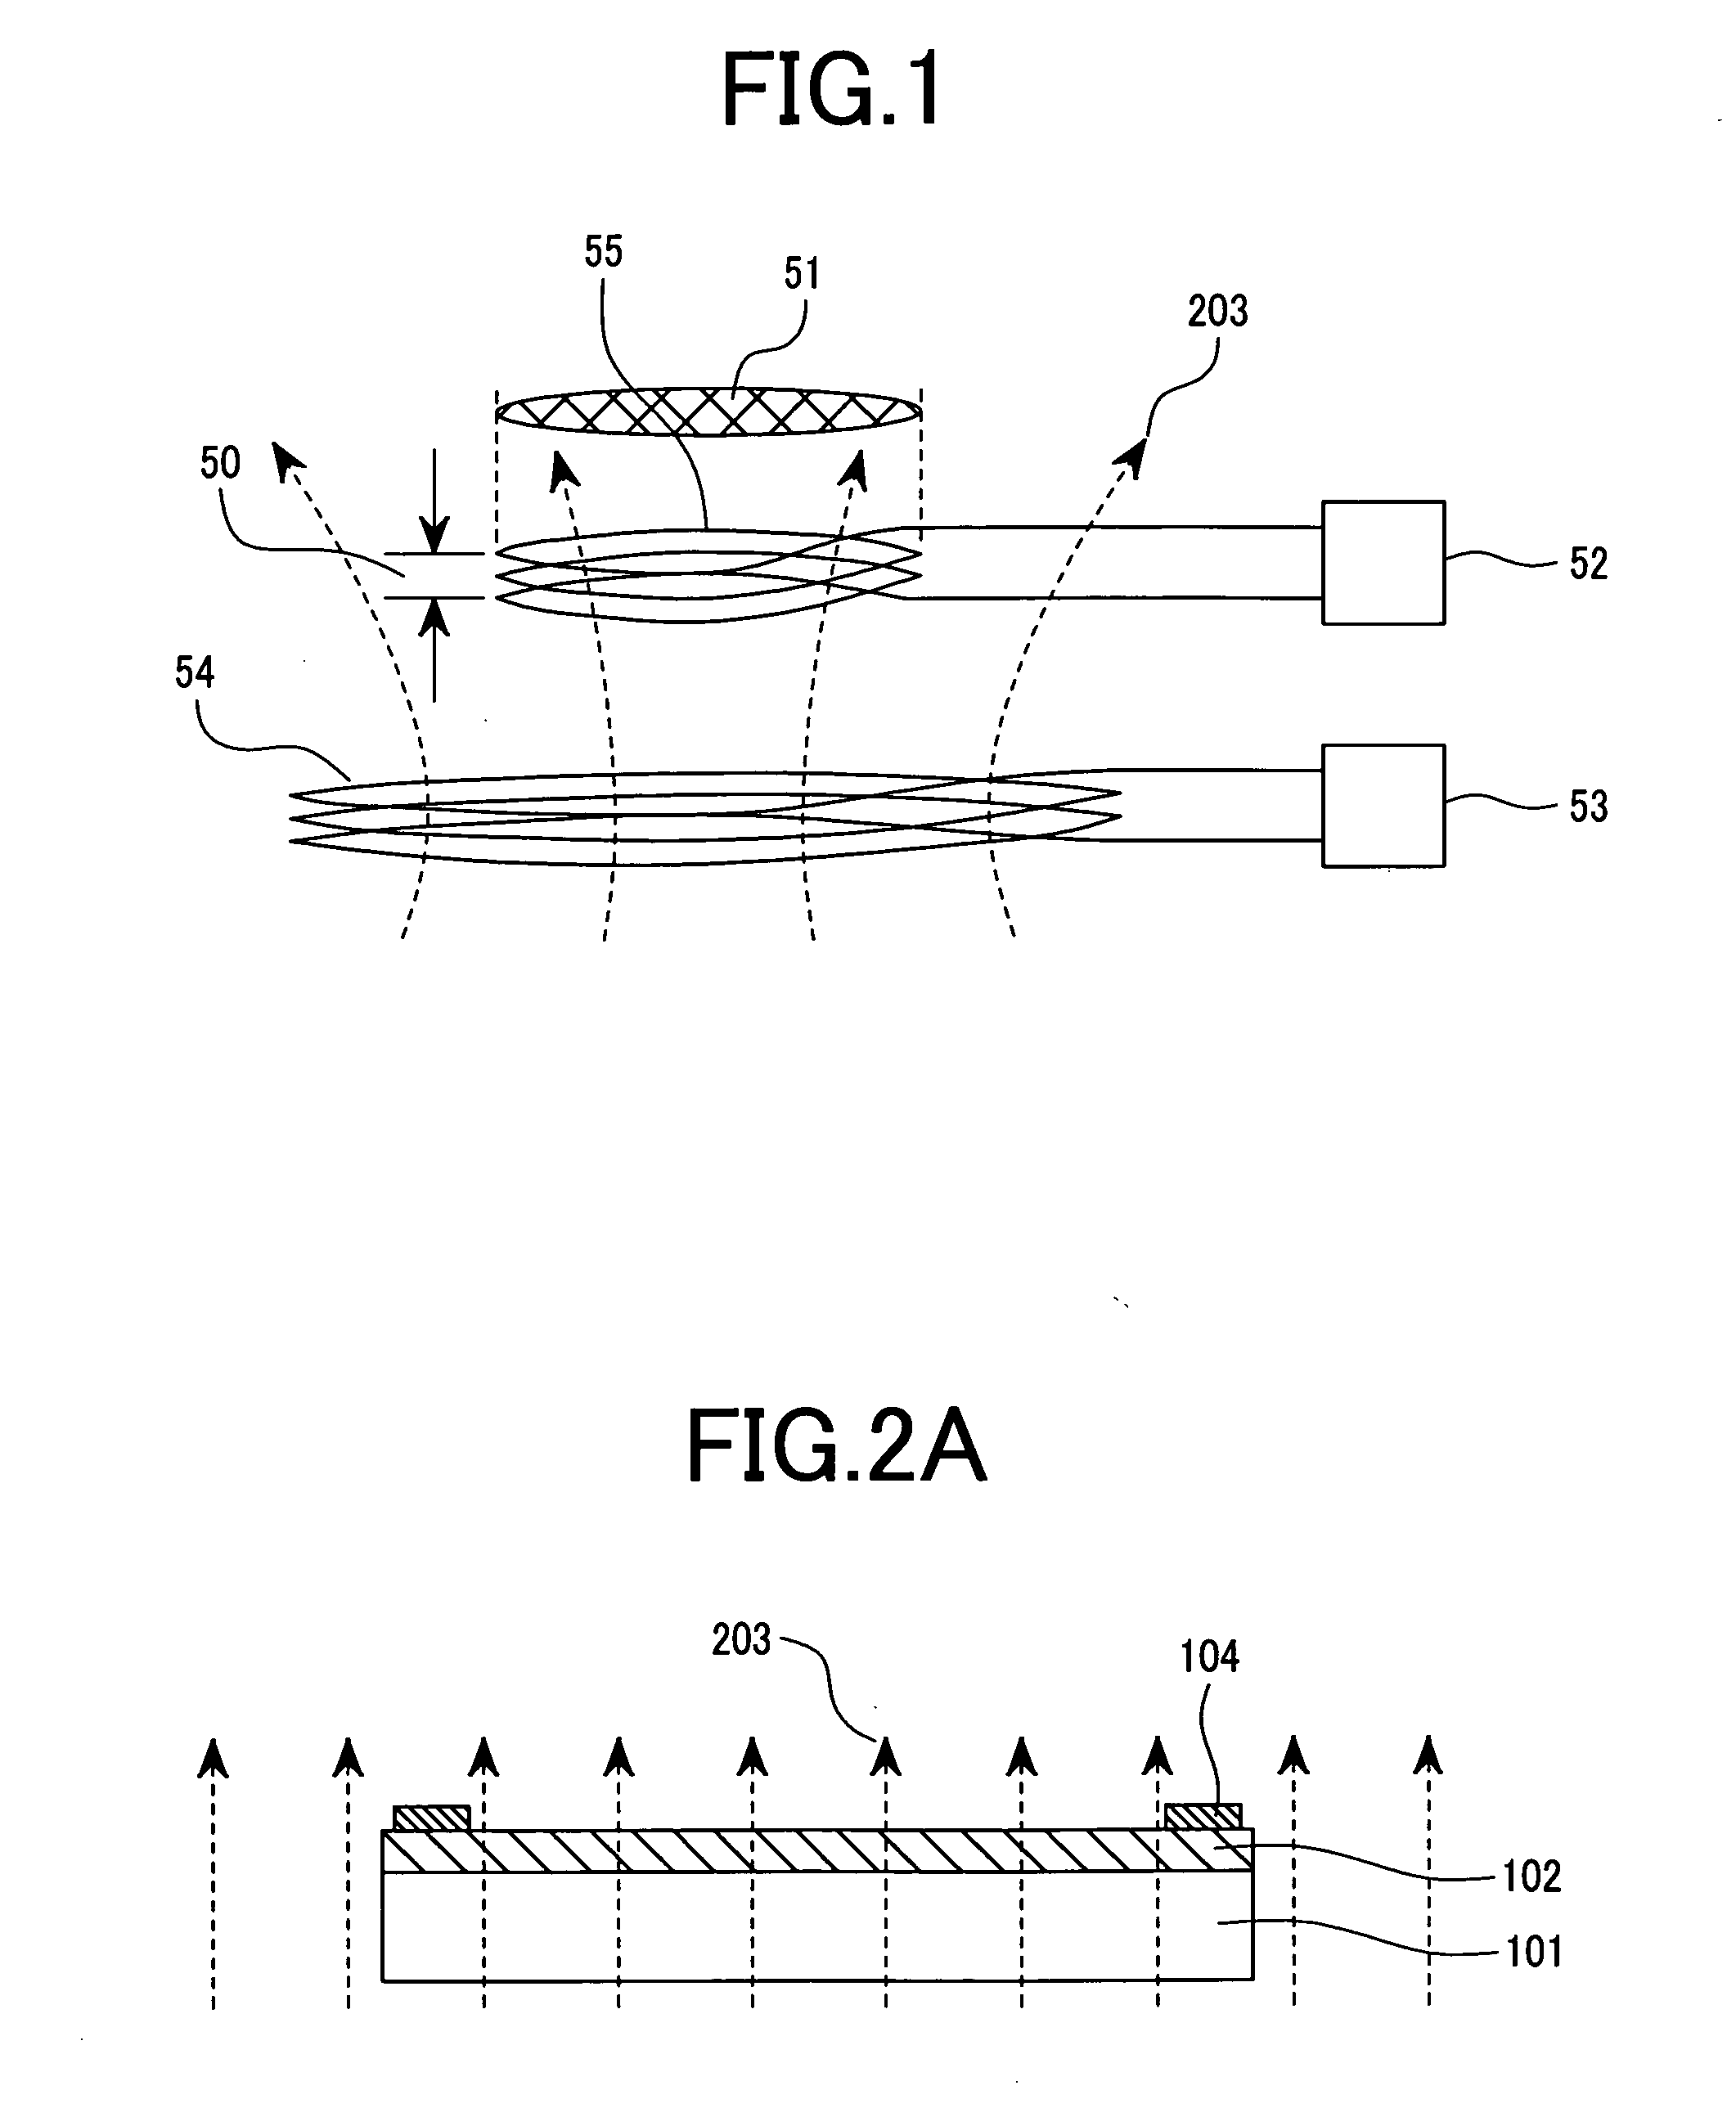 Semiconductor chip with coil antenna and communication system